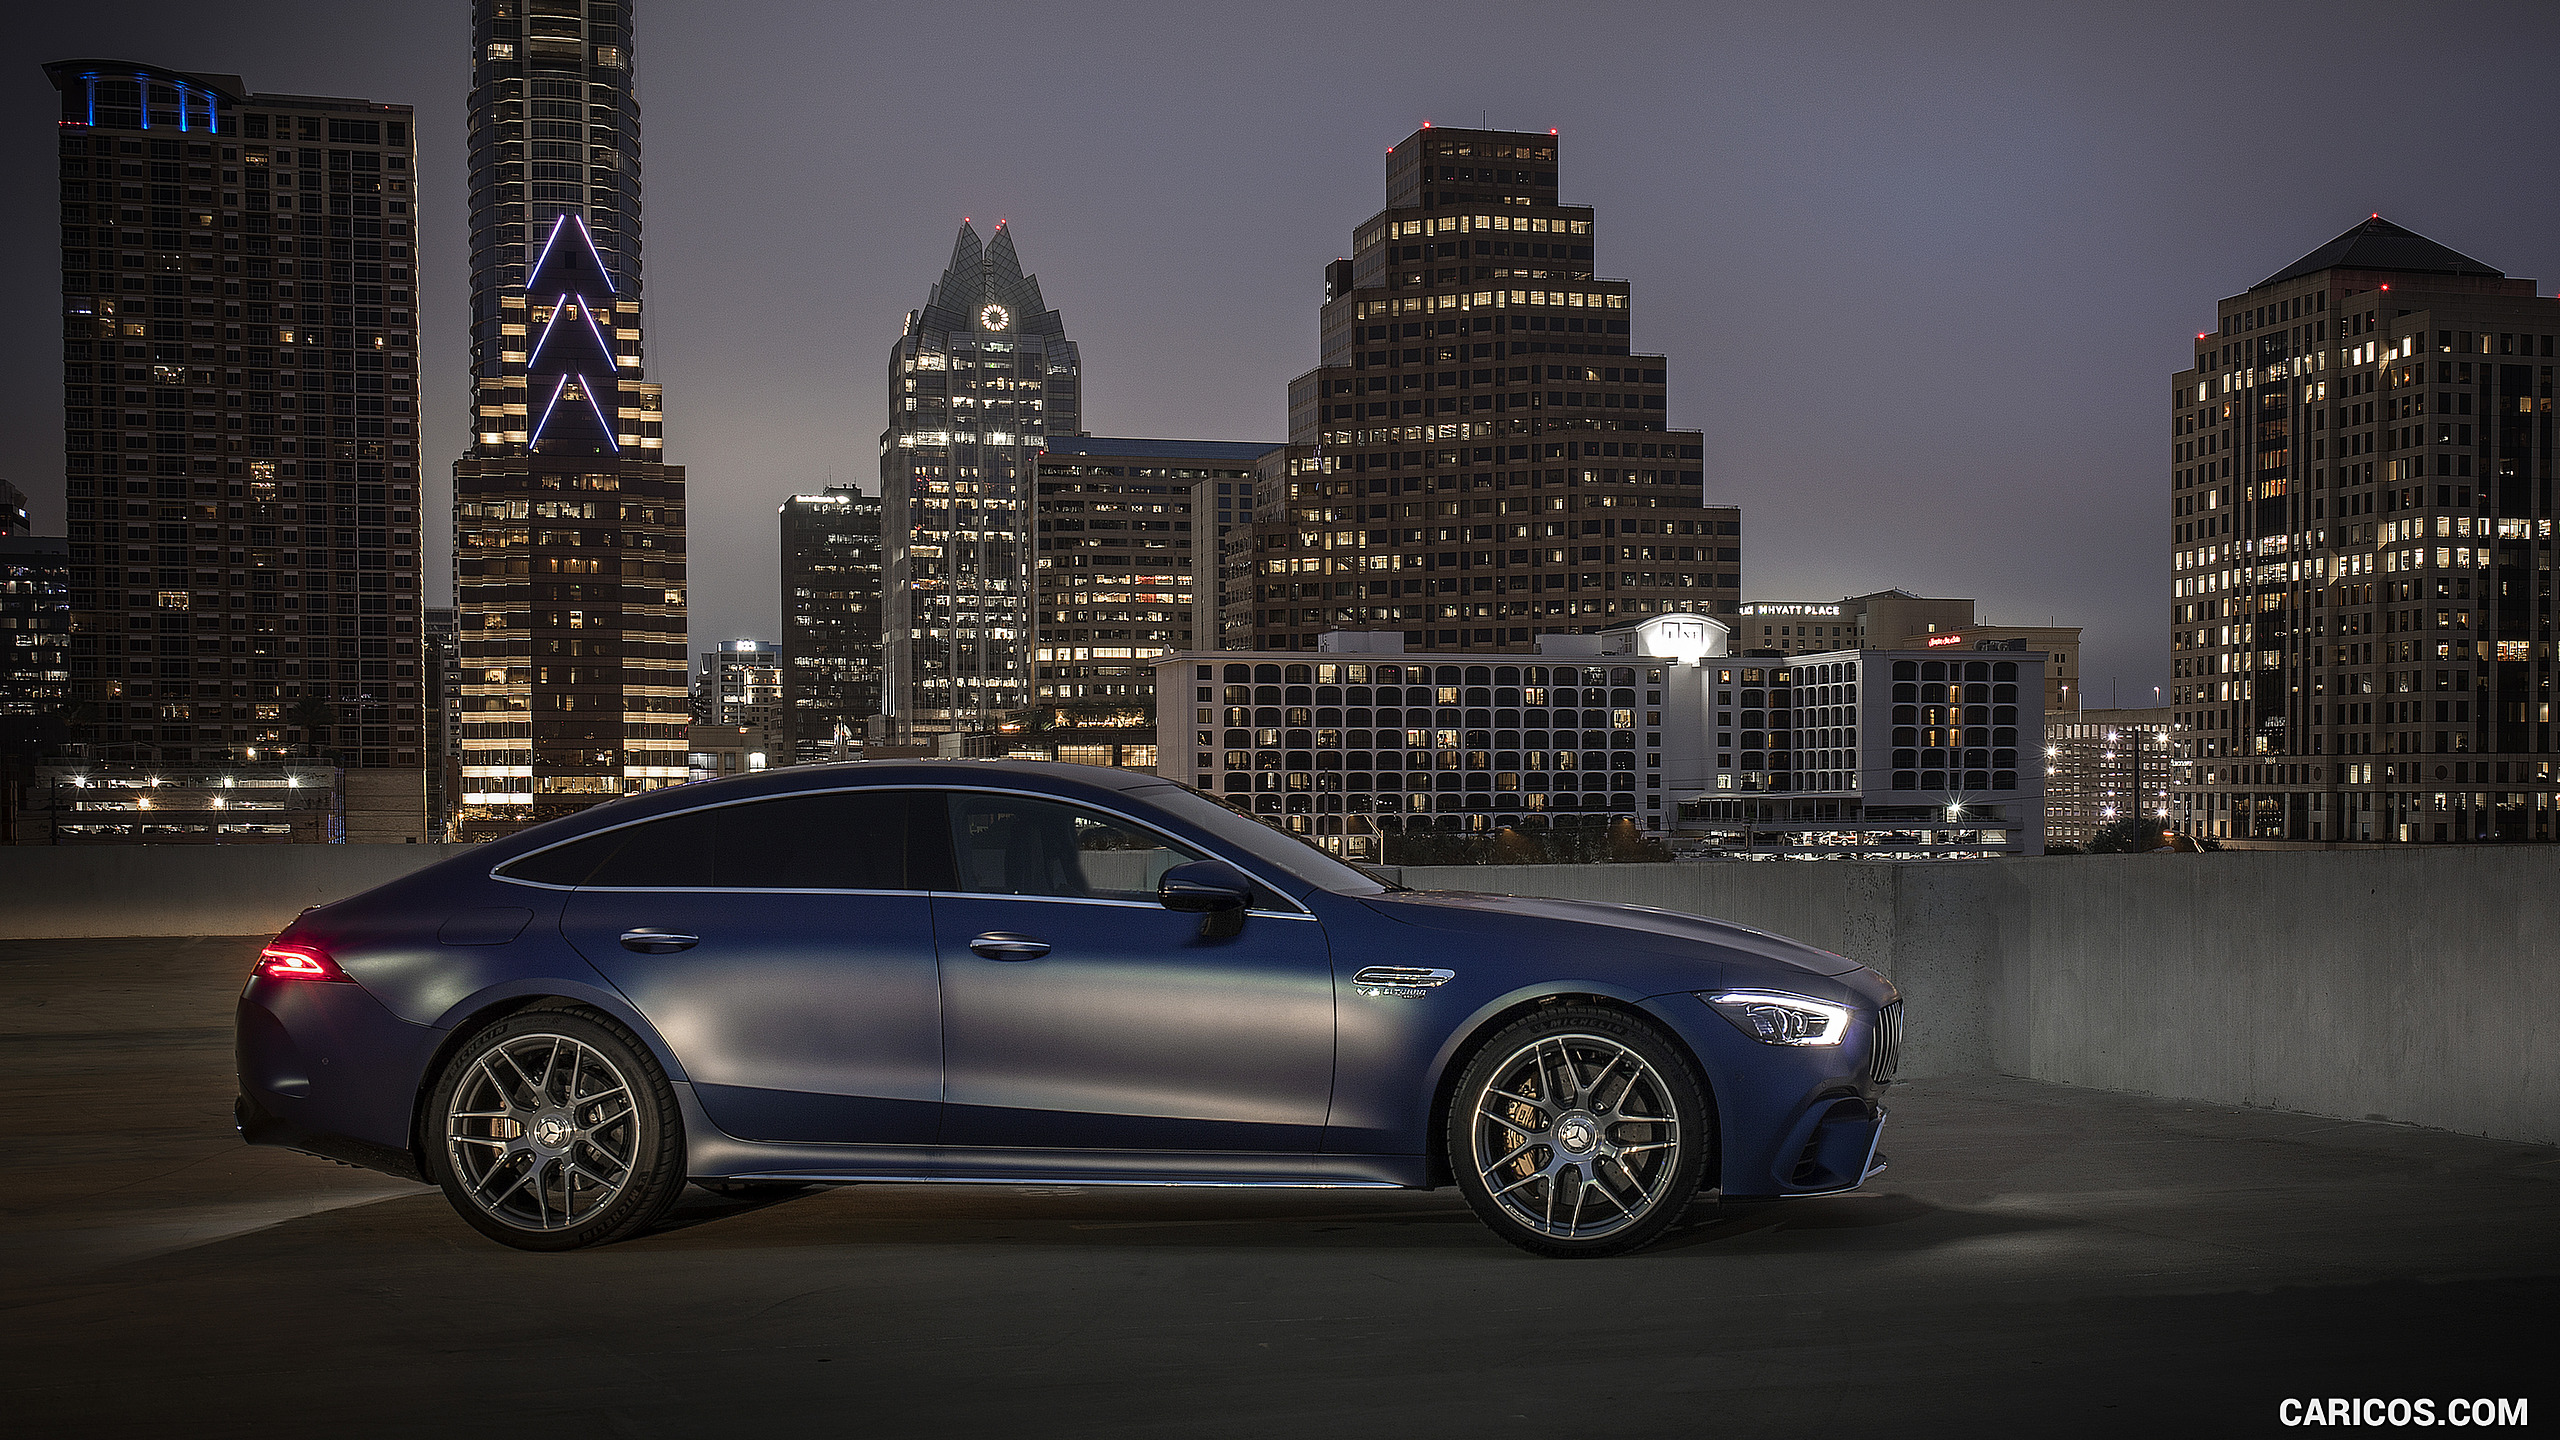 2019 Mercedes-AMG GT 63 S 4MATIC+ 4-Door Coupe - Side, #133 of 427